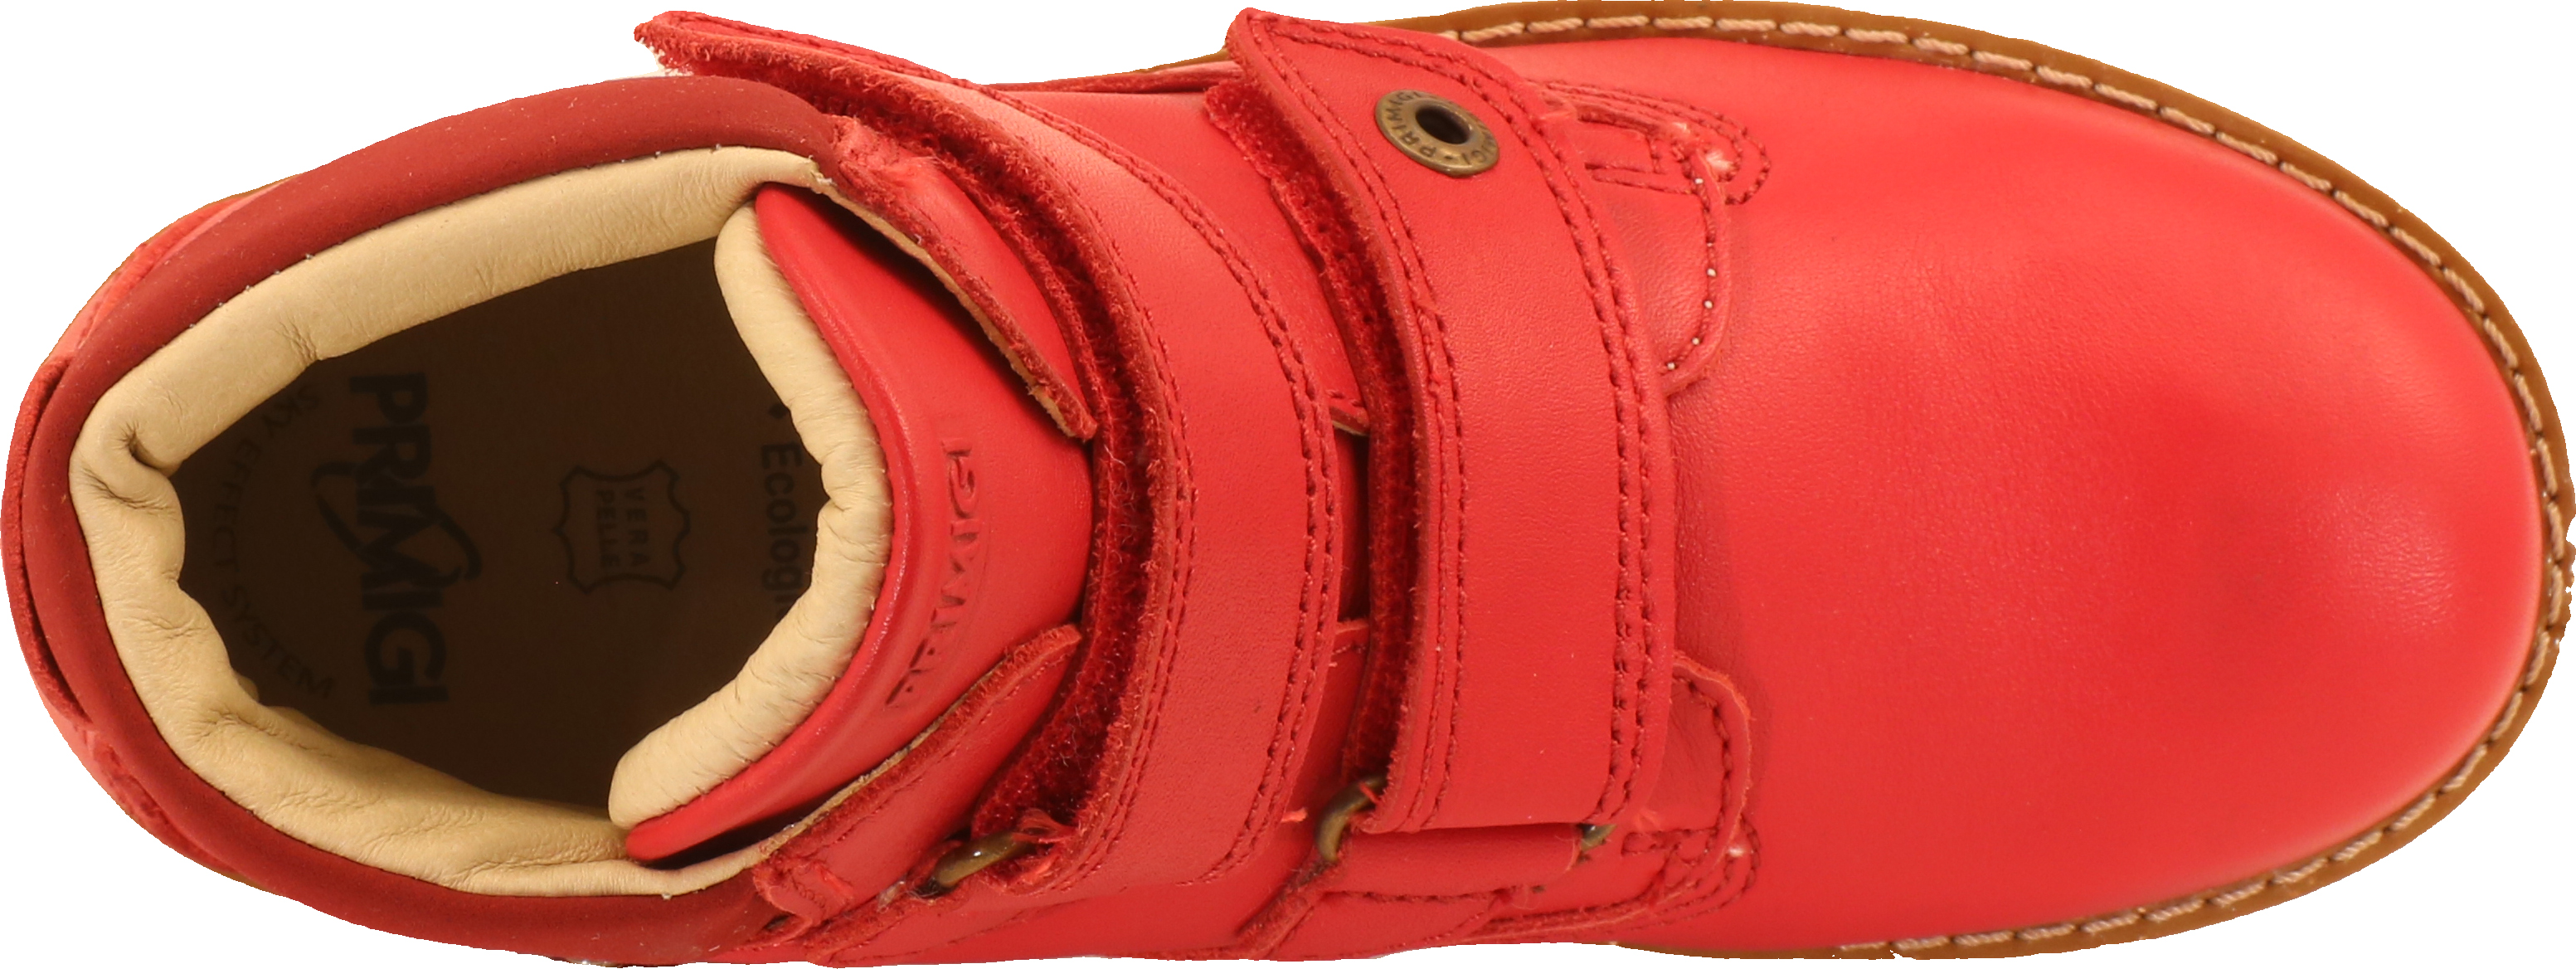 Pca 84106 - Nappa Soft - Rosso Leather